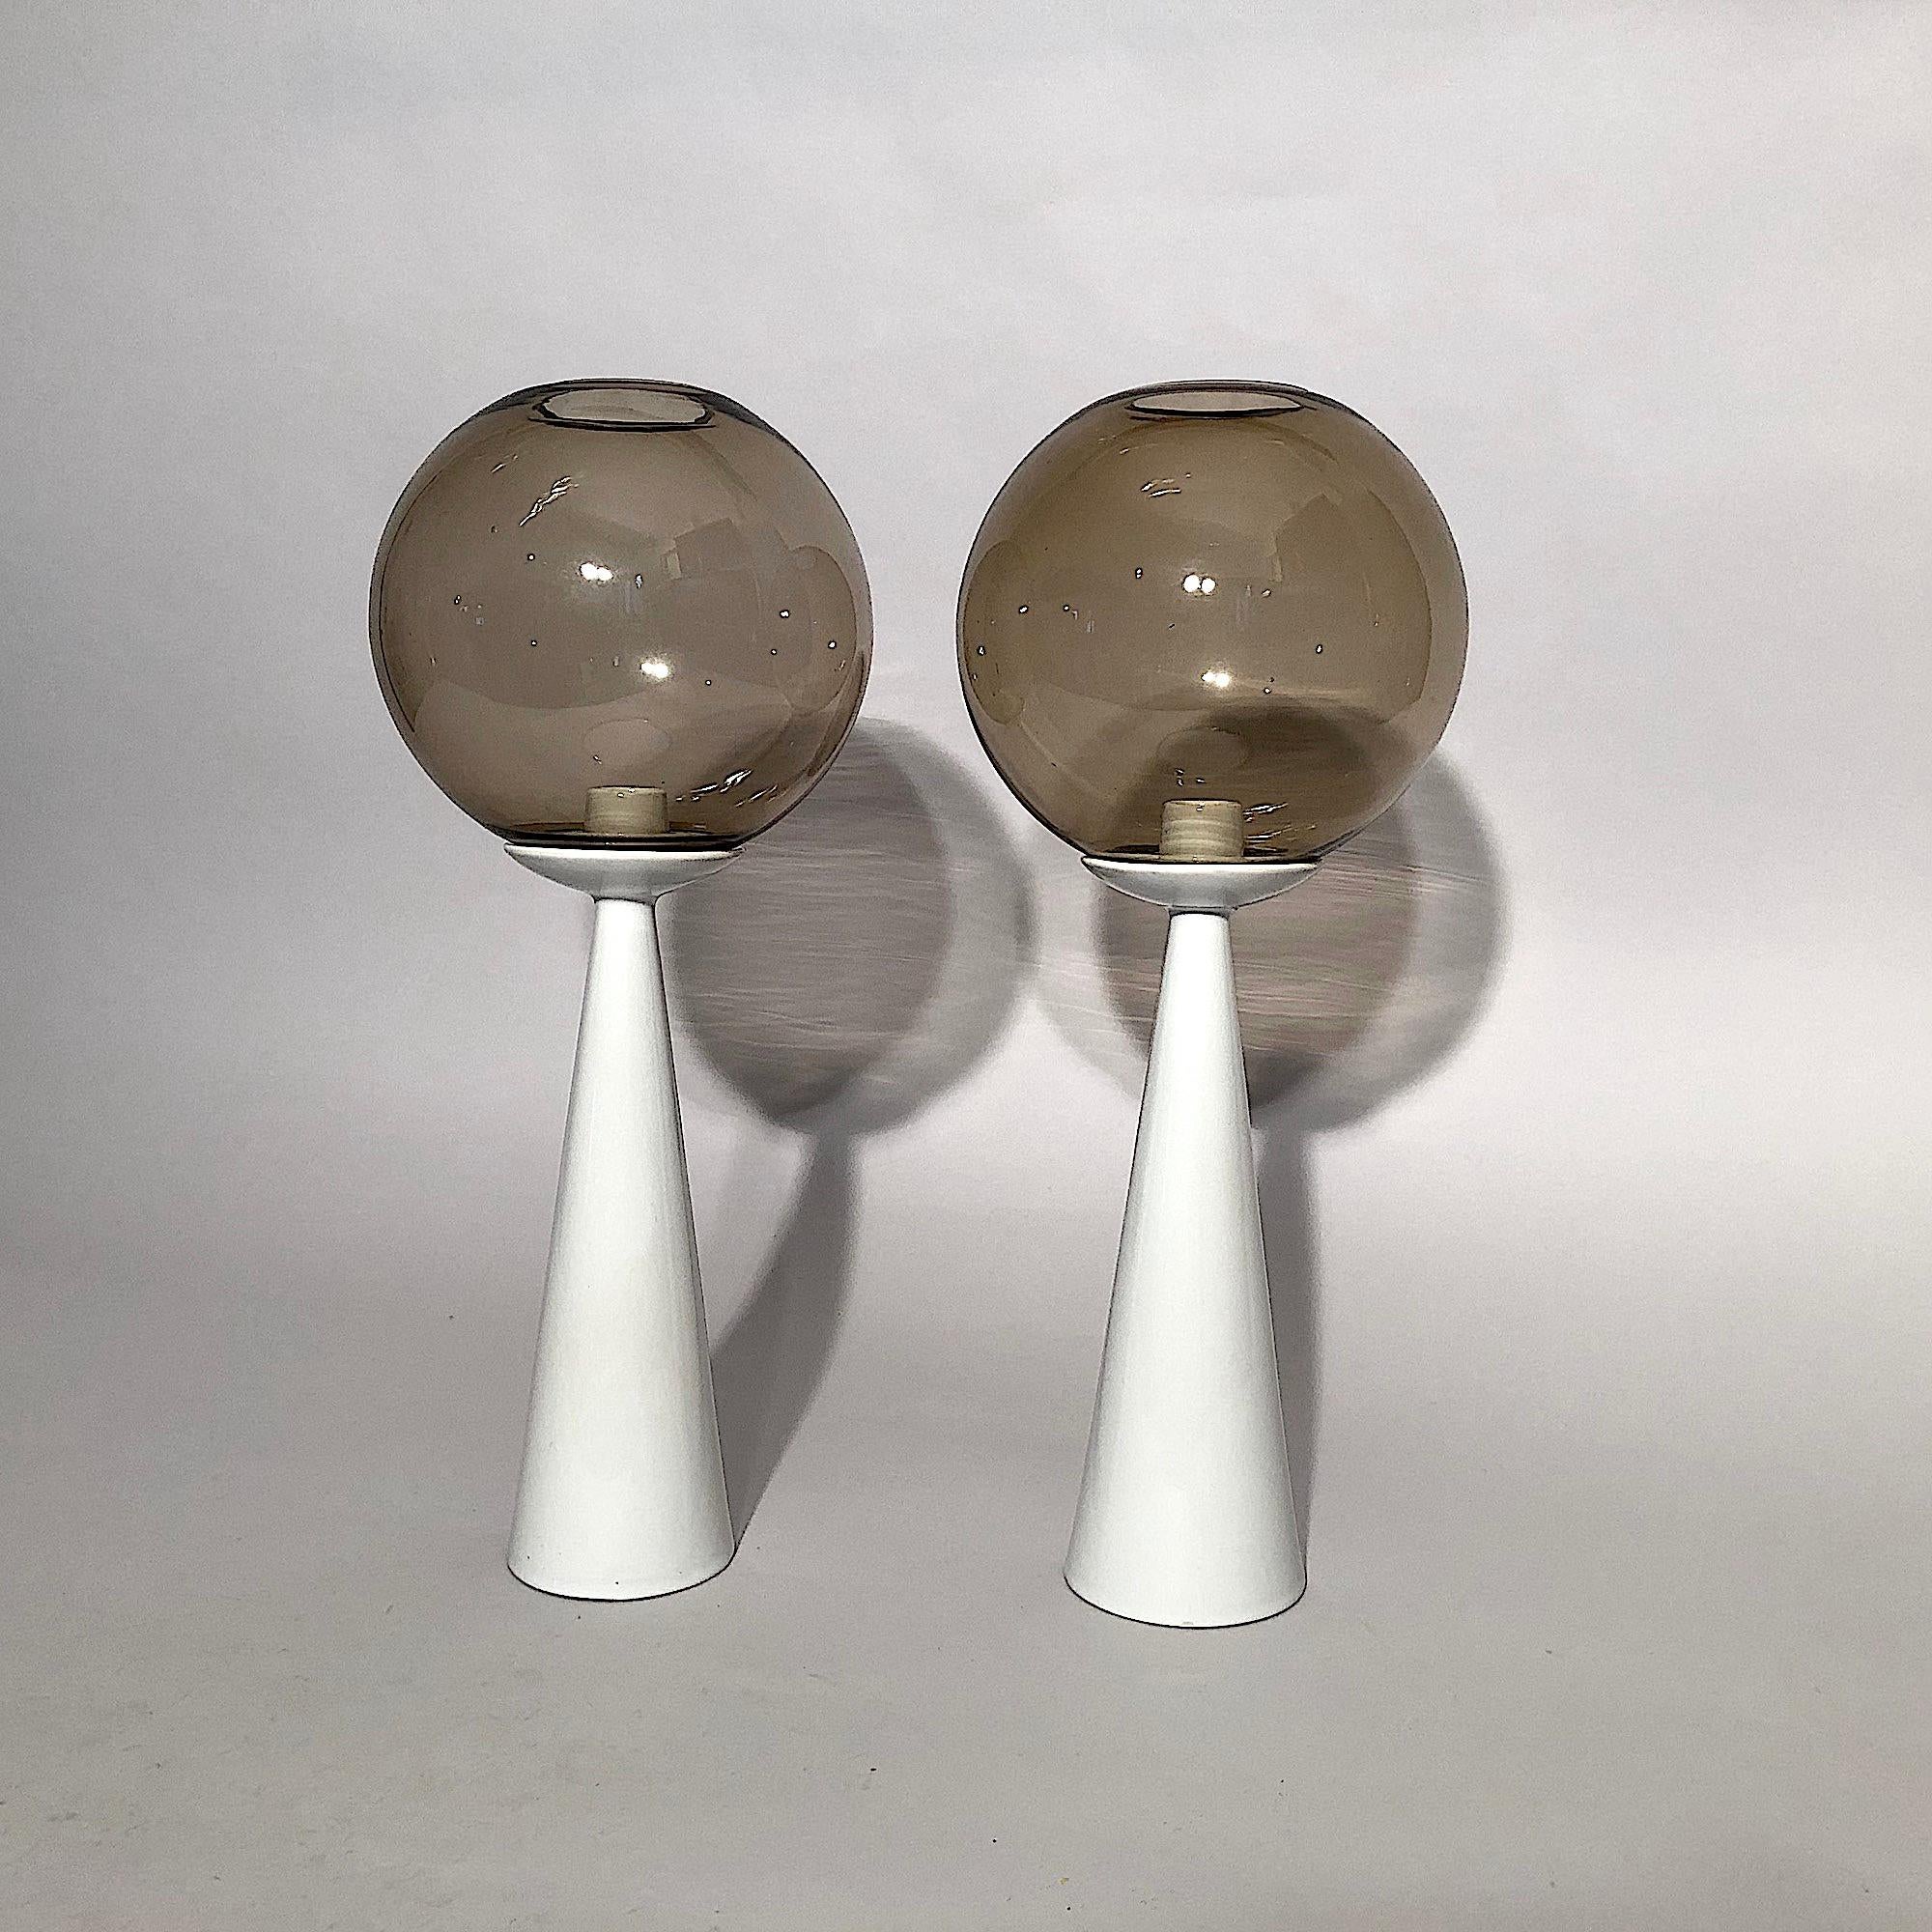 Hans Agne Jakobssen (1919 Finnish/Swedish- Åhus 2009)

Set of two very rare, late 1950s-Early 1960s Hans Agne Jakobsson cone -shaped porcelaine and globular, smoked glass Candle Holder made by Markaryd, Sweden. Model L-7.
     